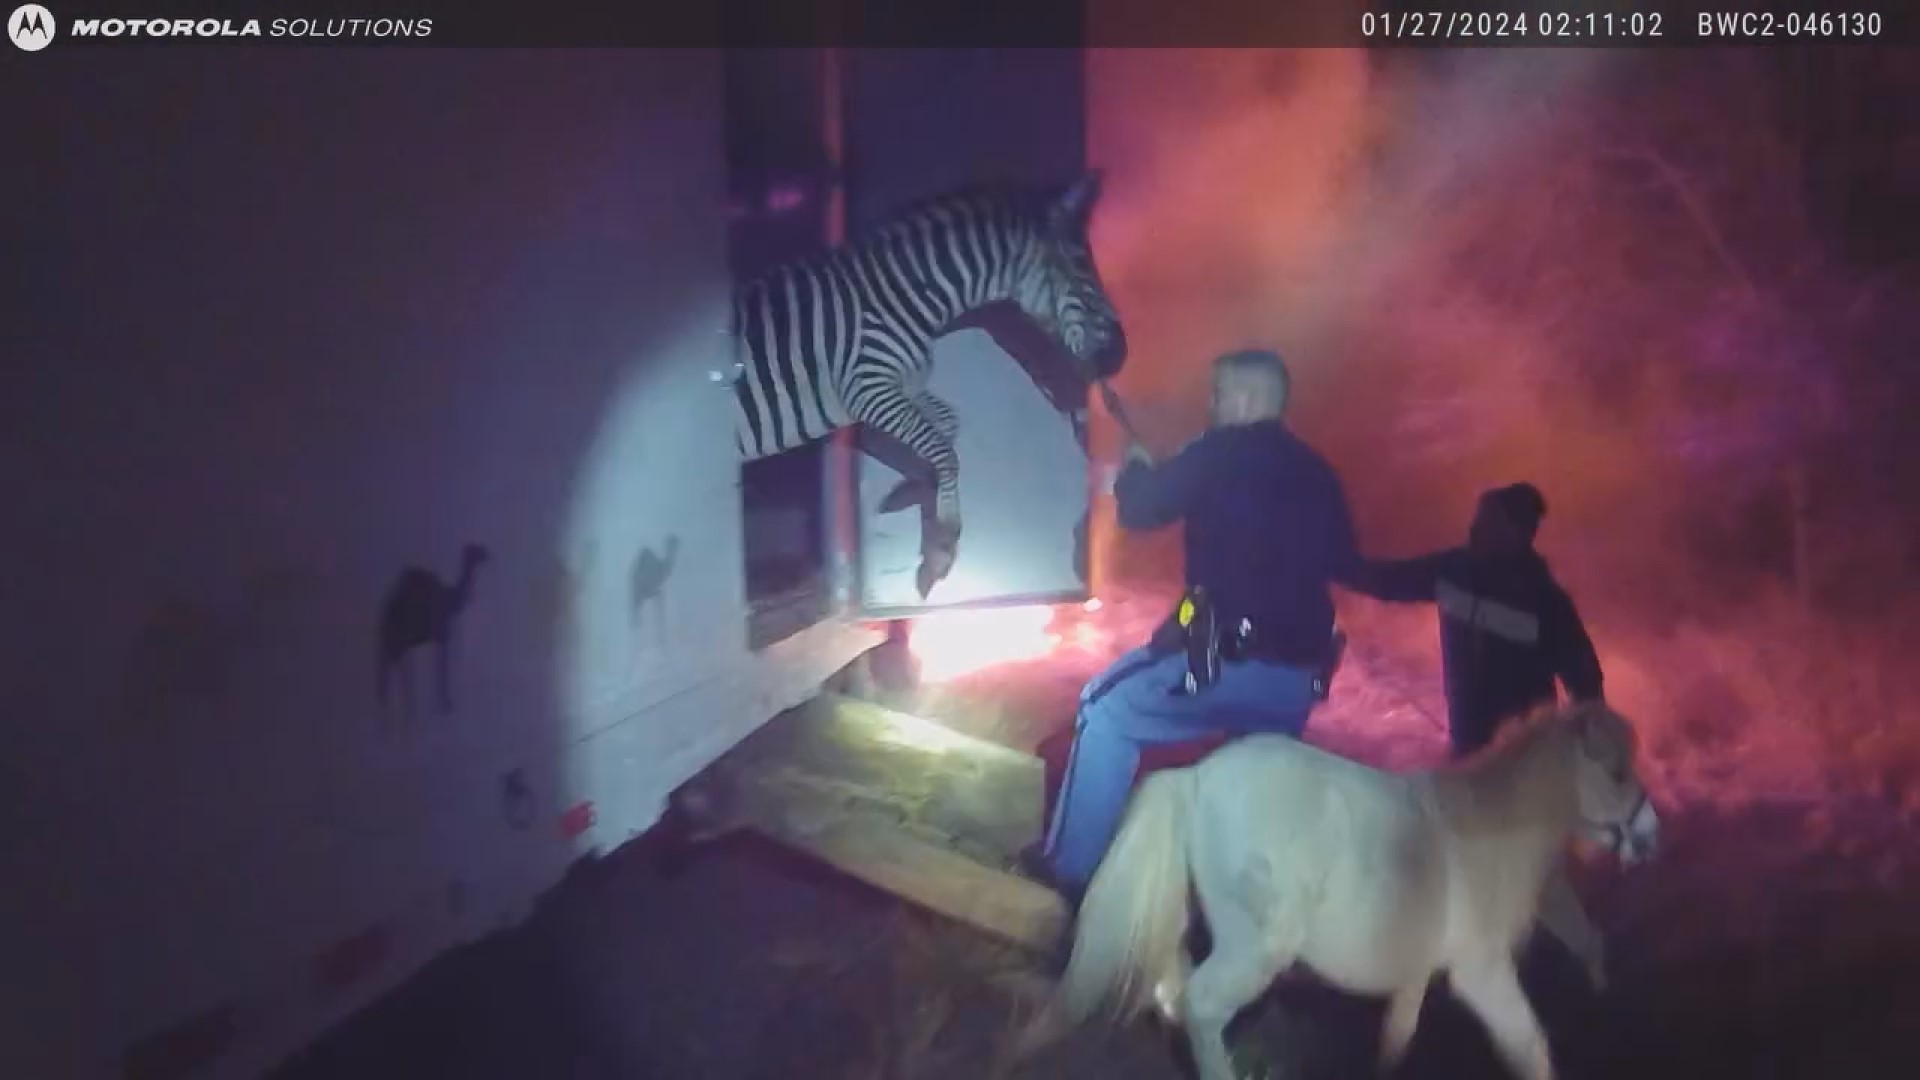 An officer with the Grant County Sheriff's Office said the animals were from the Mizpah Shrine Circus in Fort Wayne.